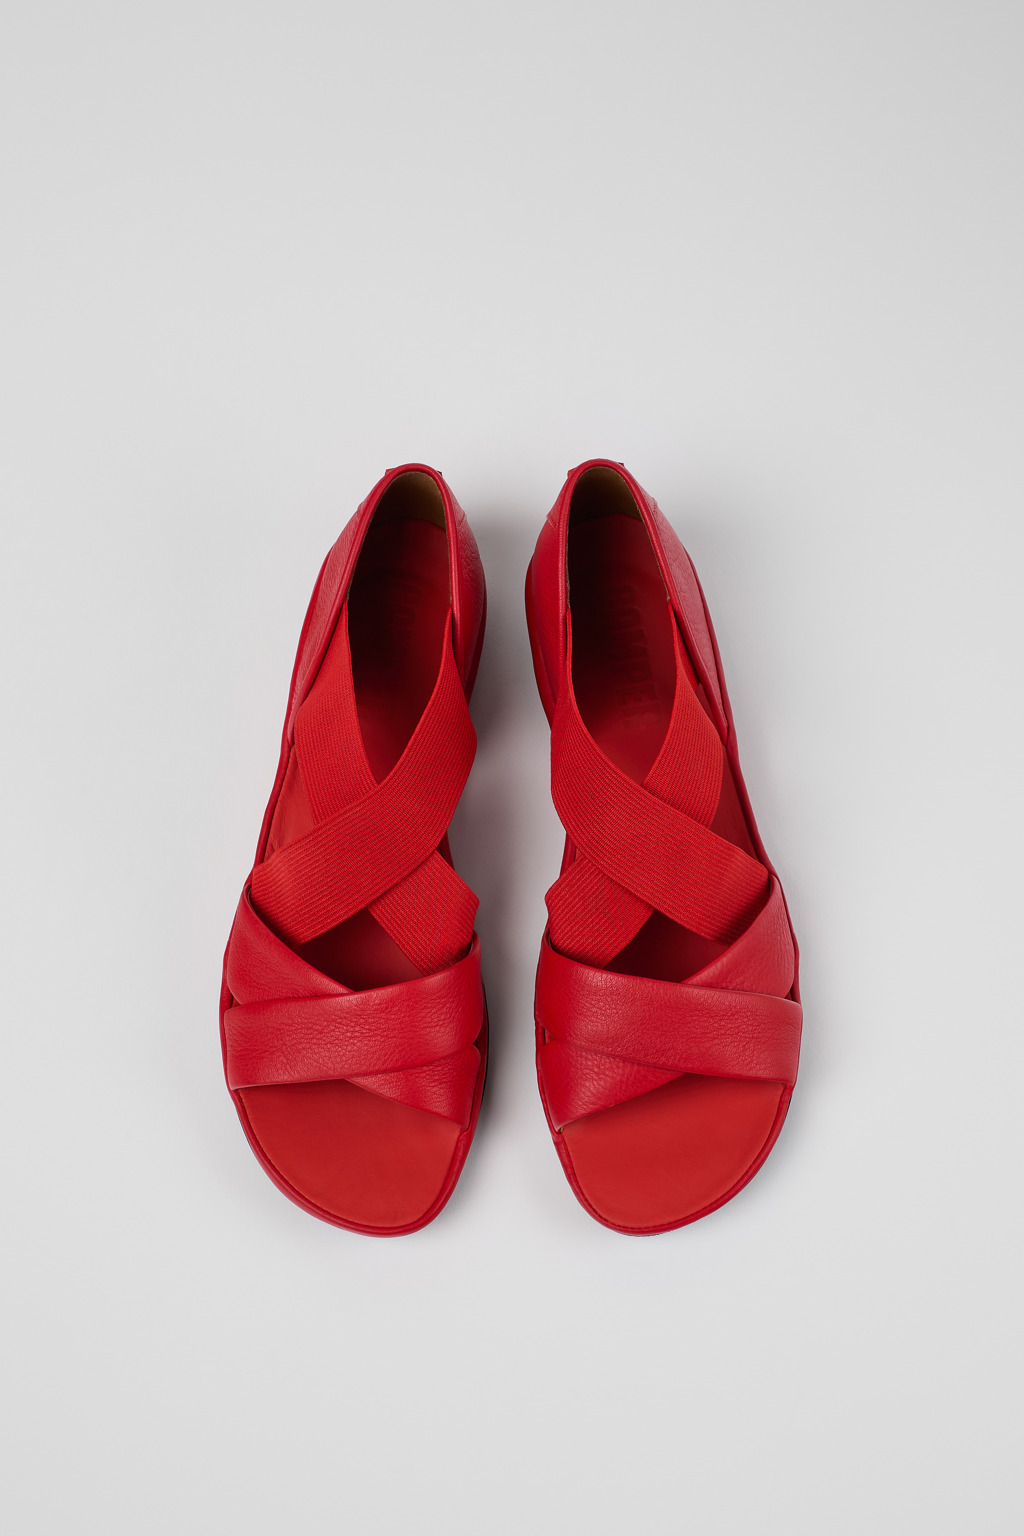 Right Red Sandals for Women - Spring/Summer collection - Camper USA